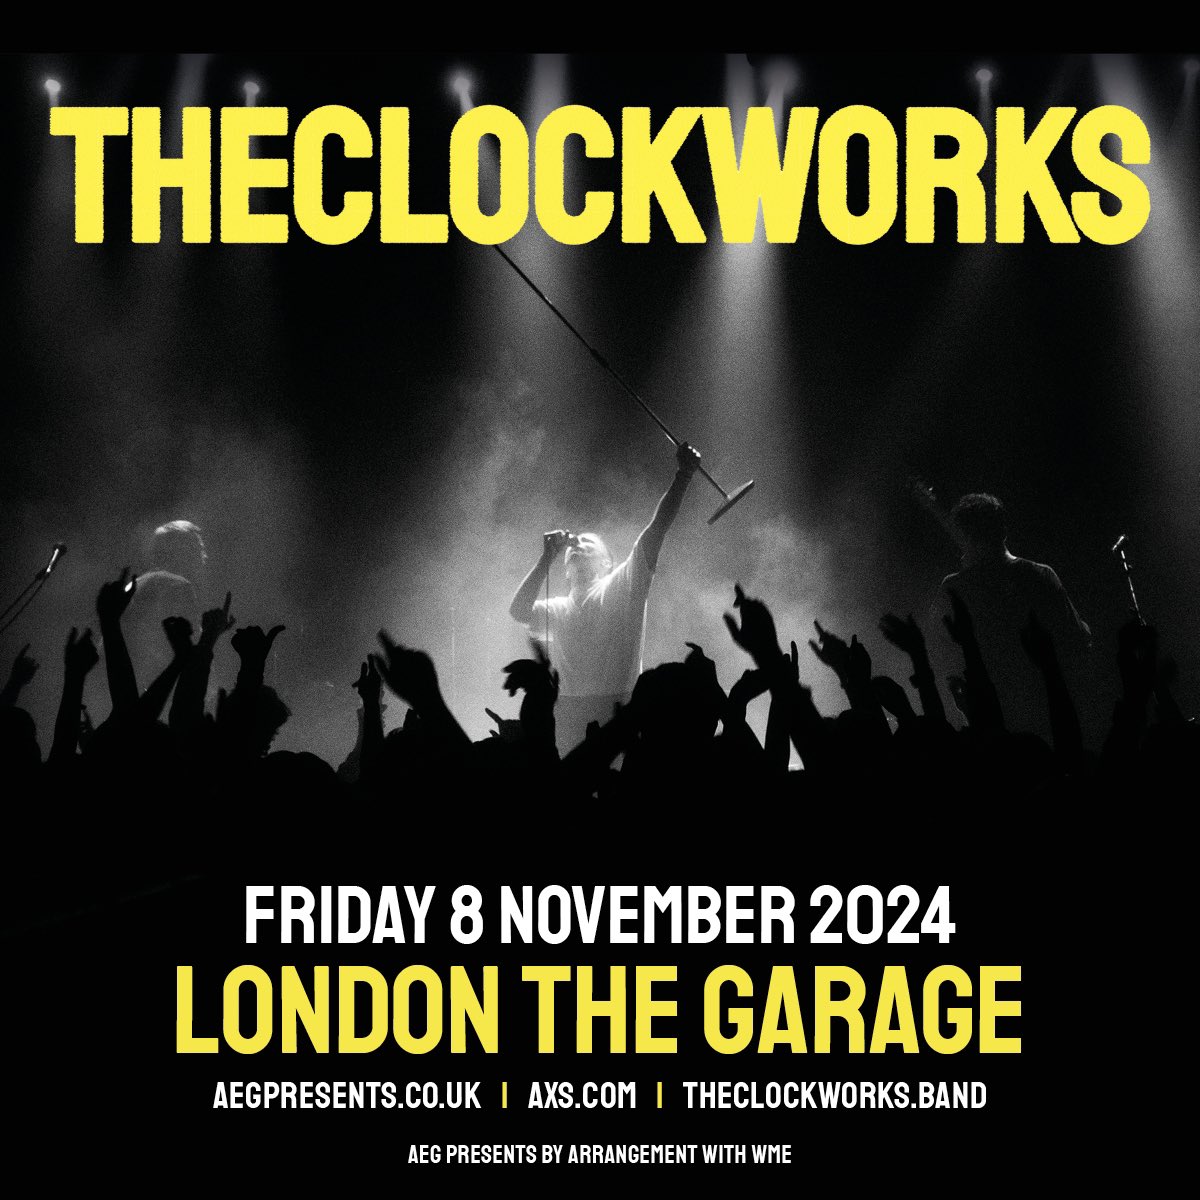 Good morning to you all. Tickets are now on sale for The Garage in November. Link -> aegp.uk/TheClockworks We’re on our way to Hamburg to play one of our favourite spots, @MolotowHamburg. There’s only a handful of tickets left. Doors 7pm - on stage 8:30pm.